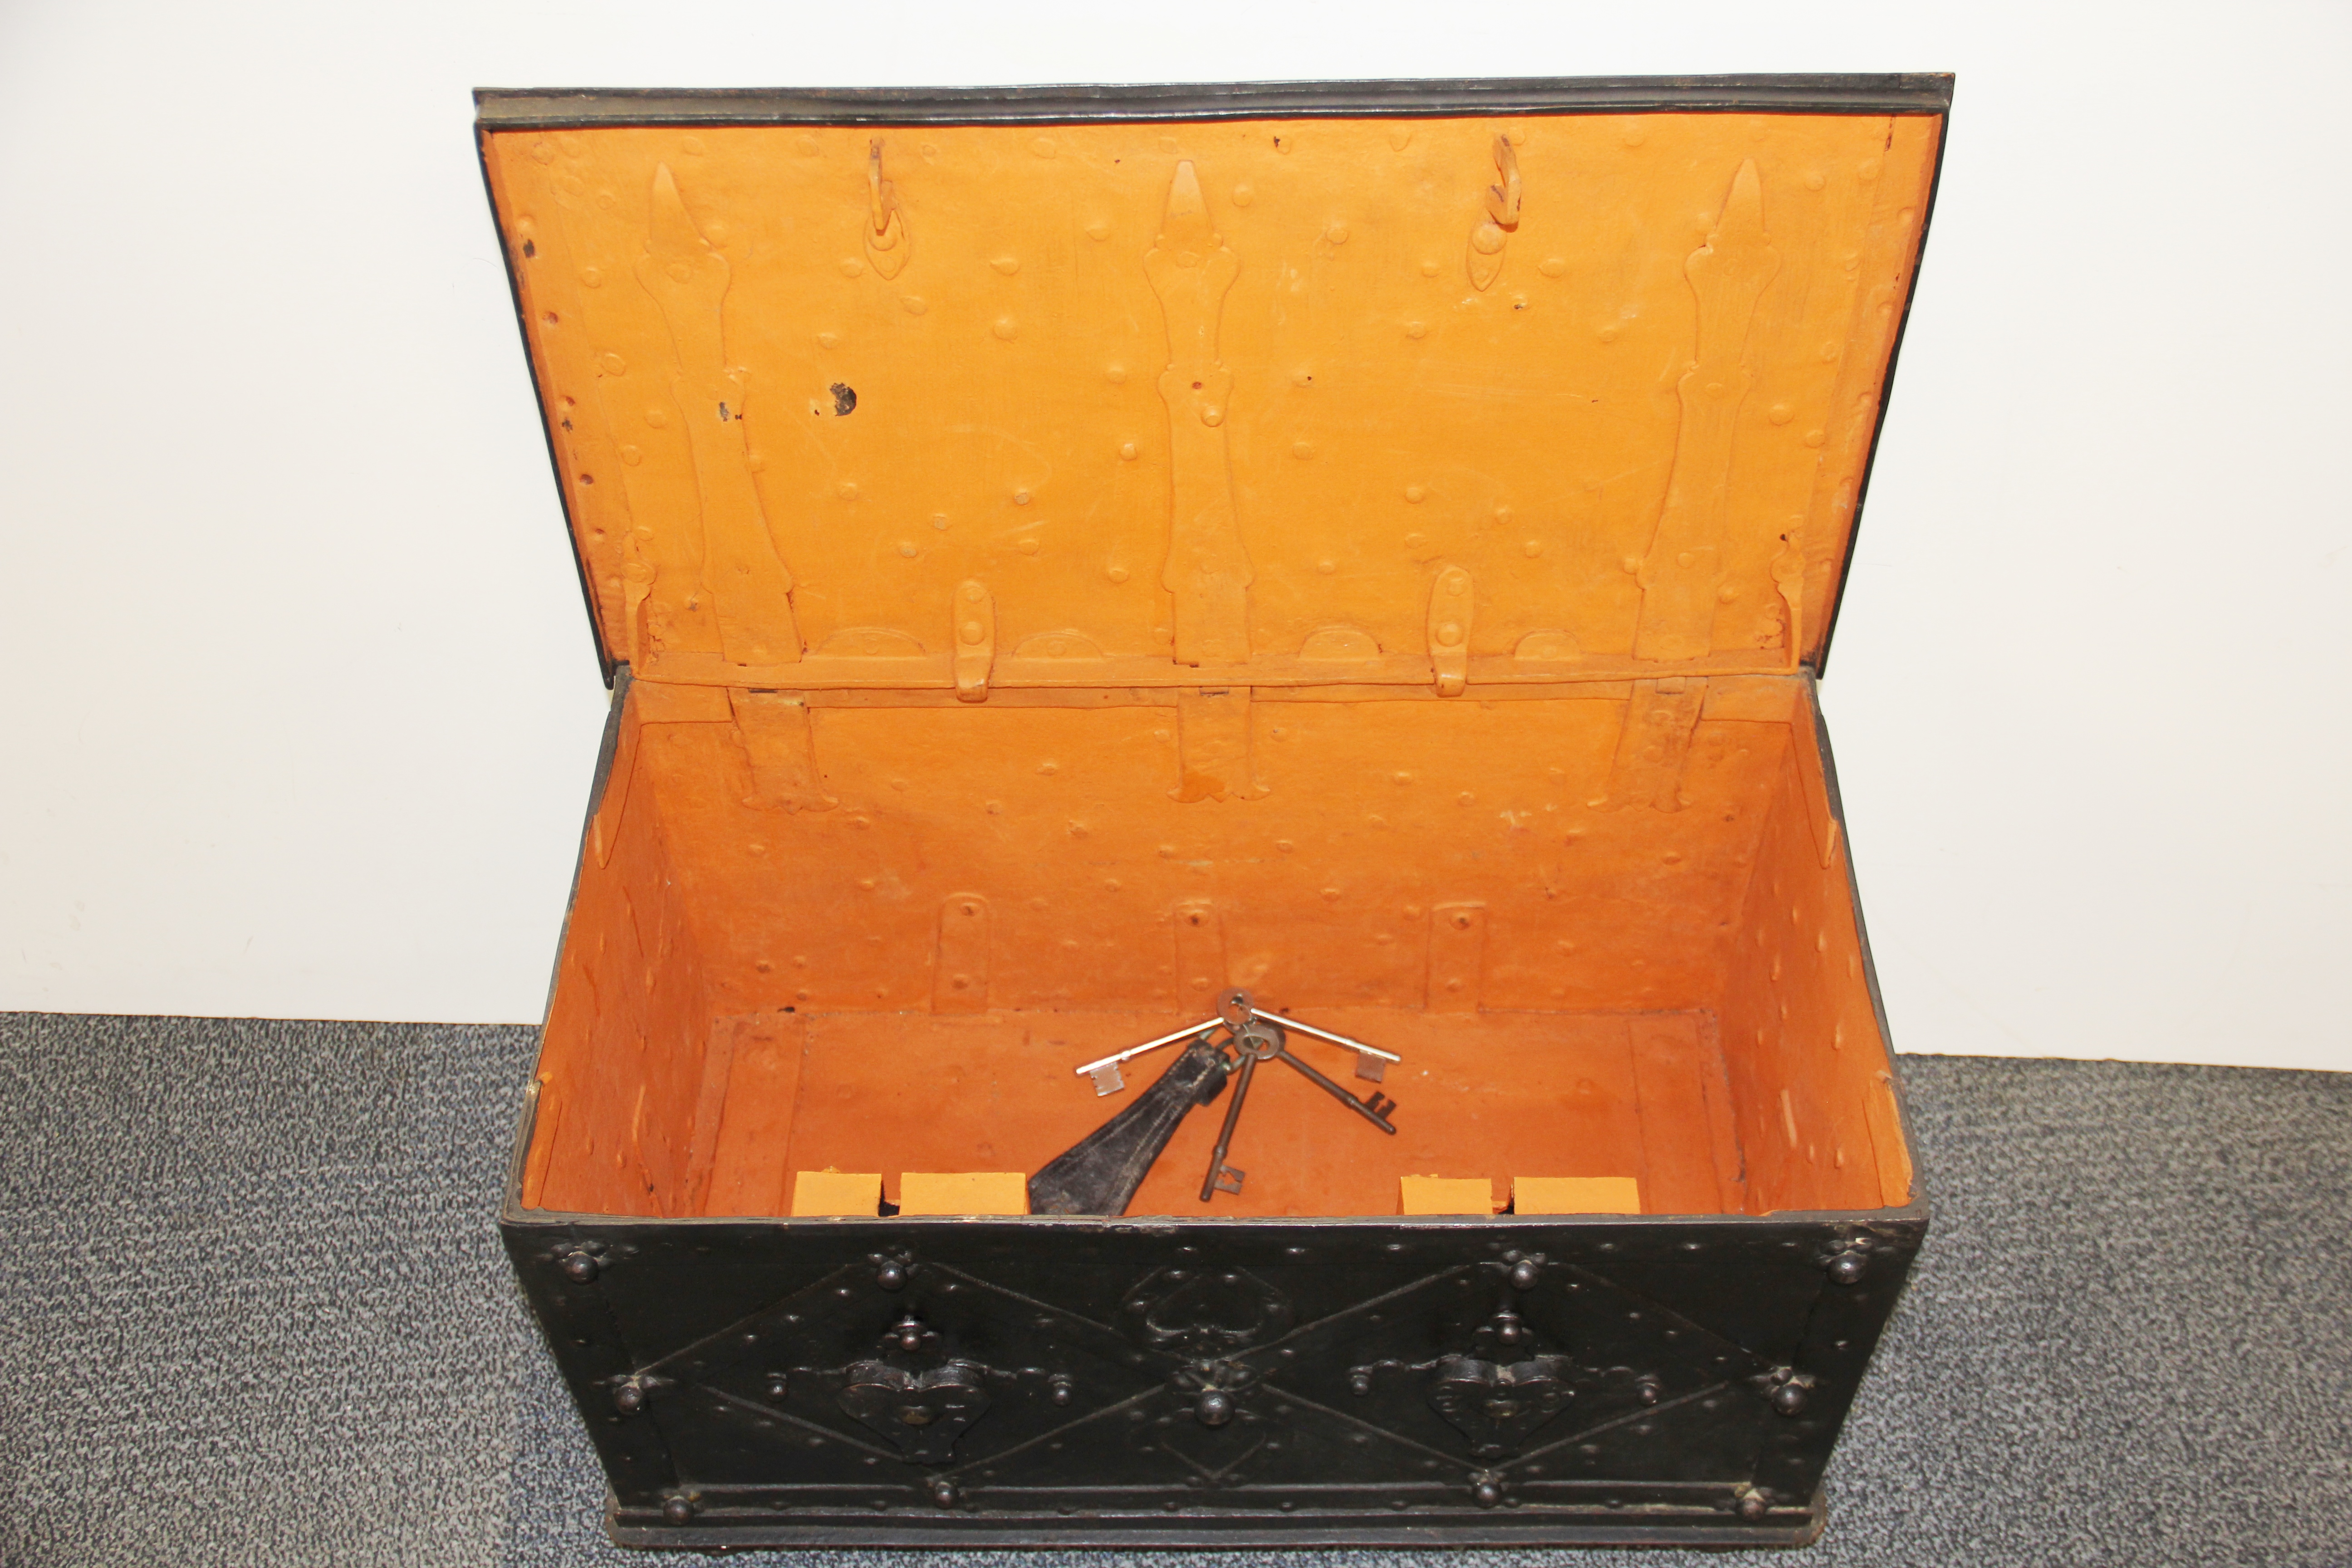 A superb 18th/early 19th century iron trunk with impressive double locking system, 62 x 34 x 37cm. - Bild 2 aus 2